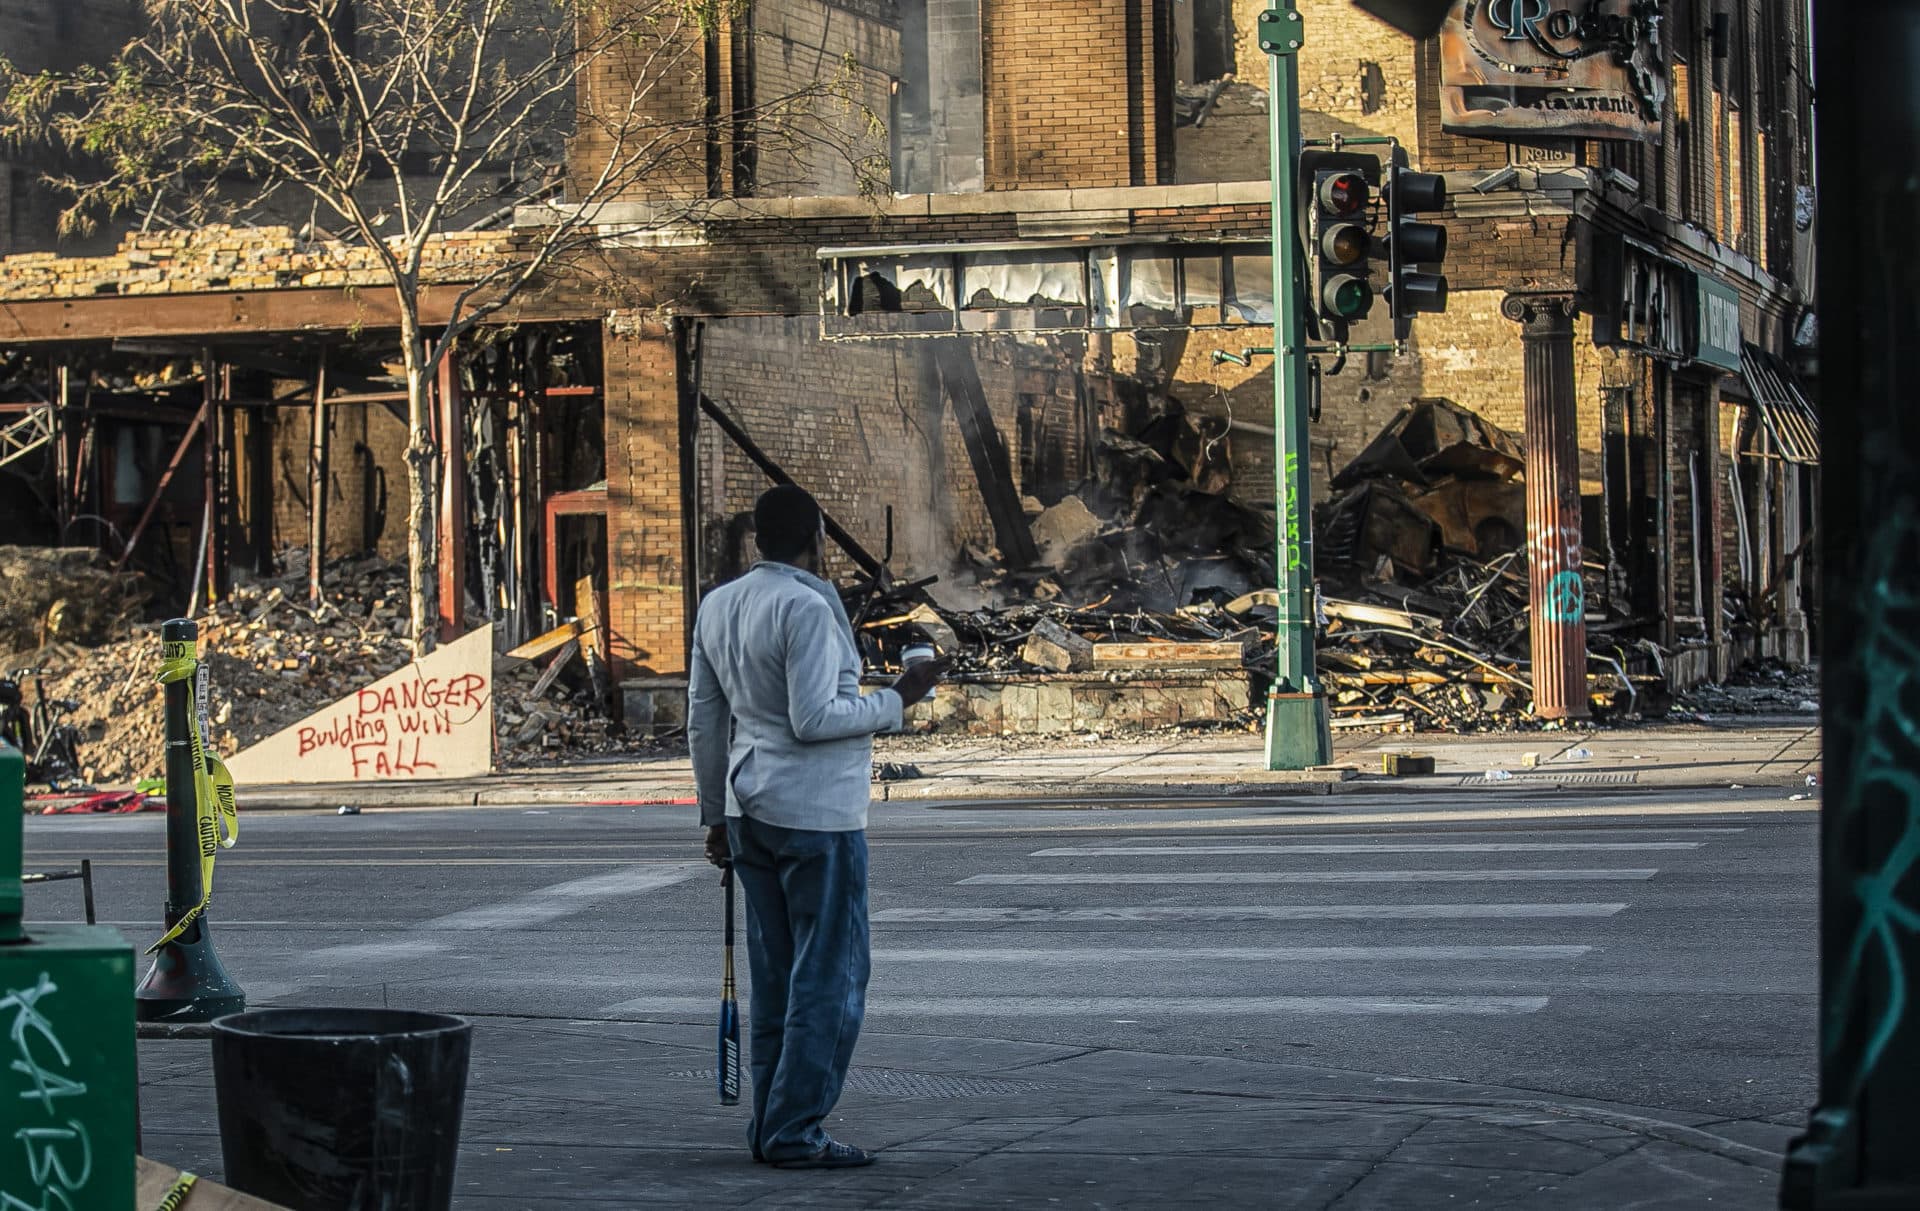 A man looks at the destruction aftermath of businesses along Lake Street, Sunday May 31, 2020, in Minneapolis. Outrage following the death of George Floyd, who died after being restrained by Minneapolis police officers on May 25, has led to the burning of businesses along the the Lake Street corridor where immigrants have found success. (AP Photo/Bebeto Matthews)